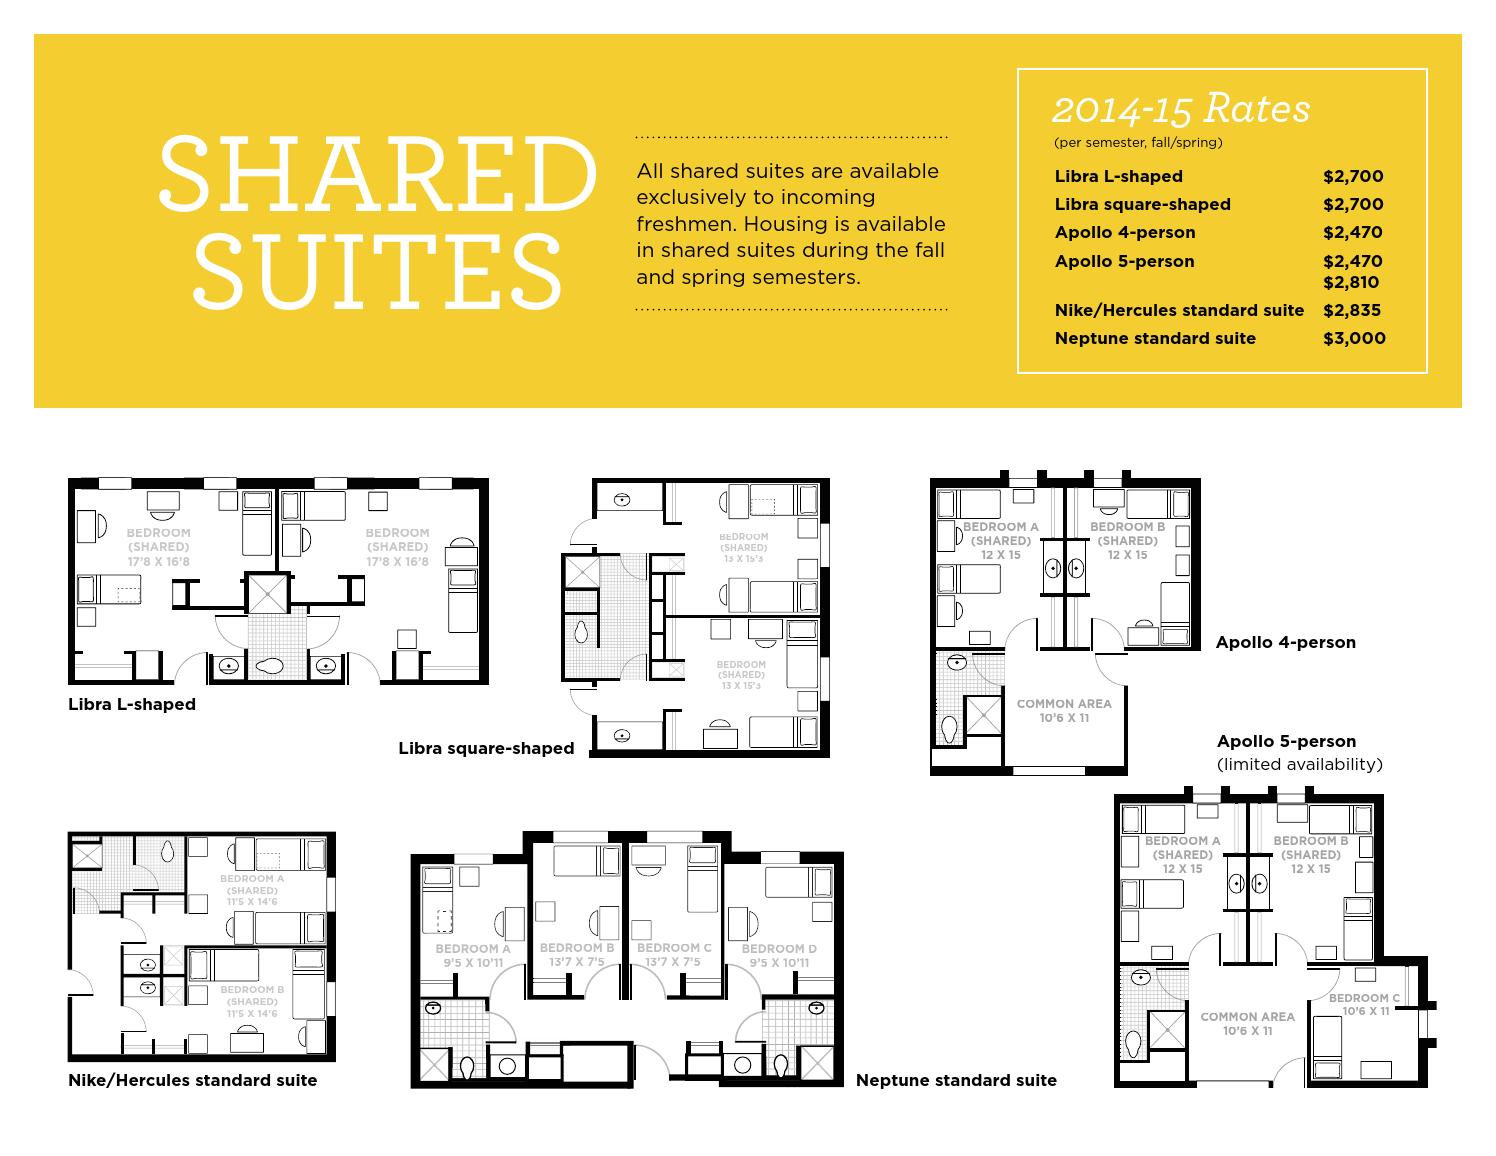 ISSUU UCF Housing Floor Plans 201415 by University of